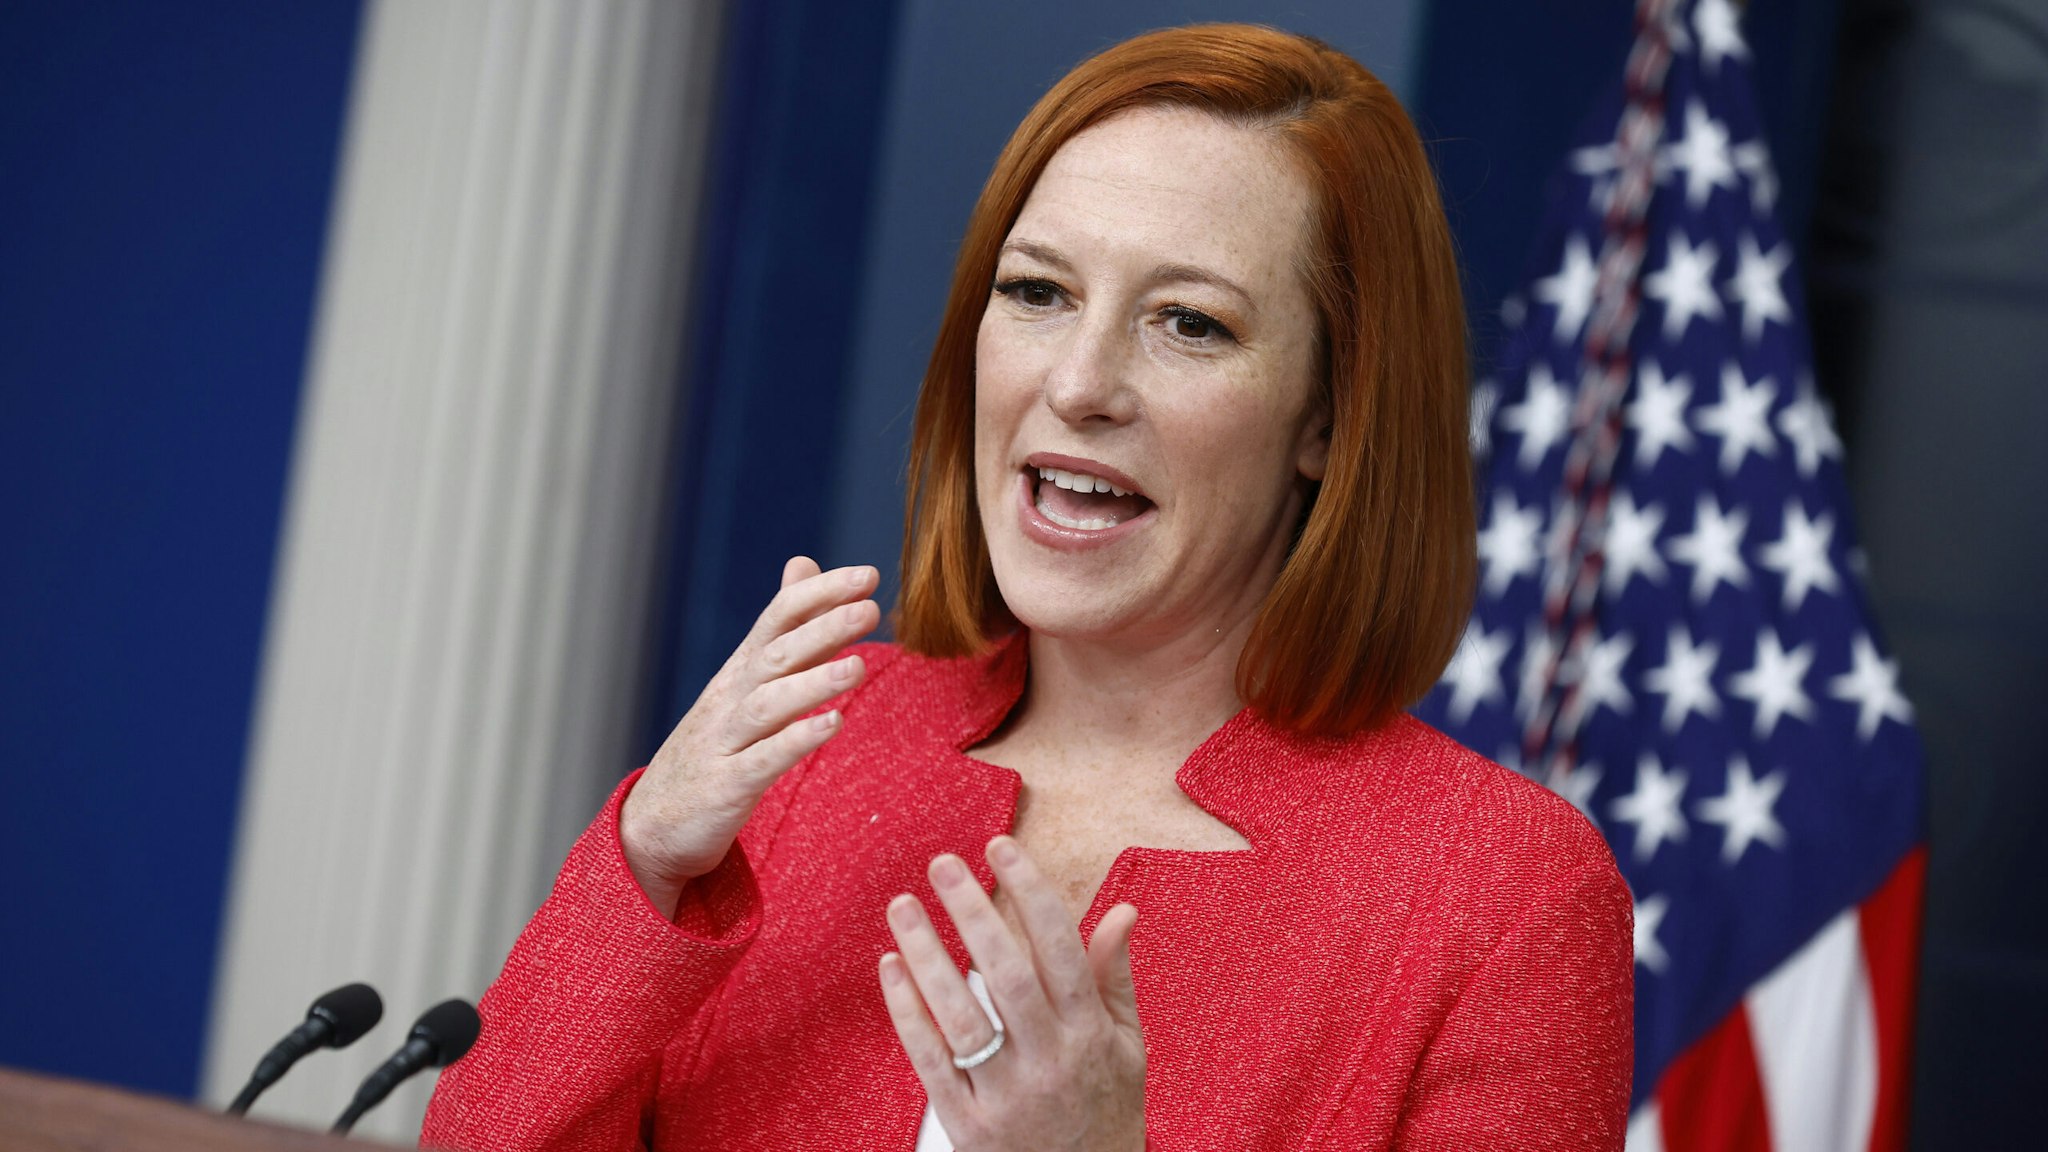 WASHINGTON, DC - JANUARY 14: White House Press Secretary Jen Psaki talks to reporters in the Brady Press Briefing Room at the White House on January 14, 2022 in Washington, DC. Psaki took questions about Russia's threat to Ukraine, the ongoing response by the Biden Administration to the coronavirus pandemic and the struggle for Democrats to get voting rights legislation through the Congress.